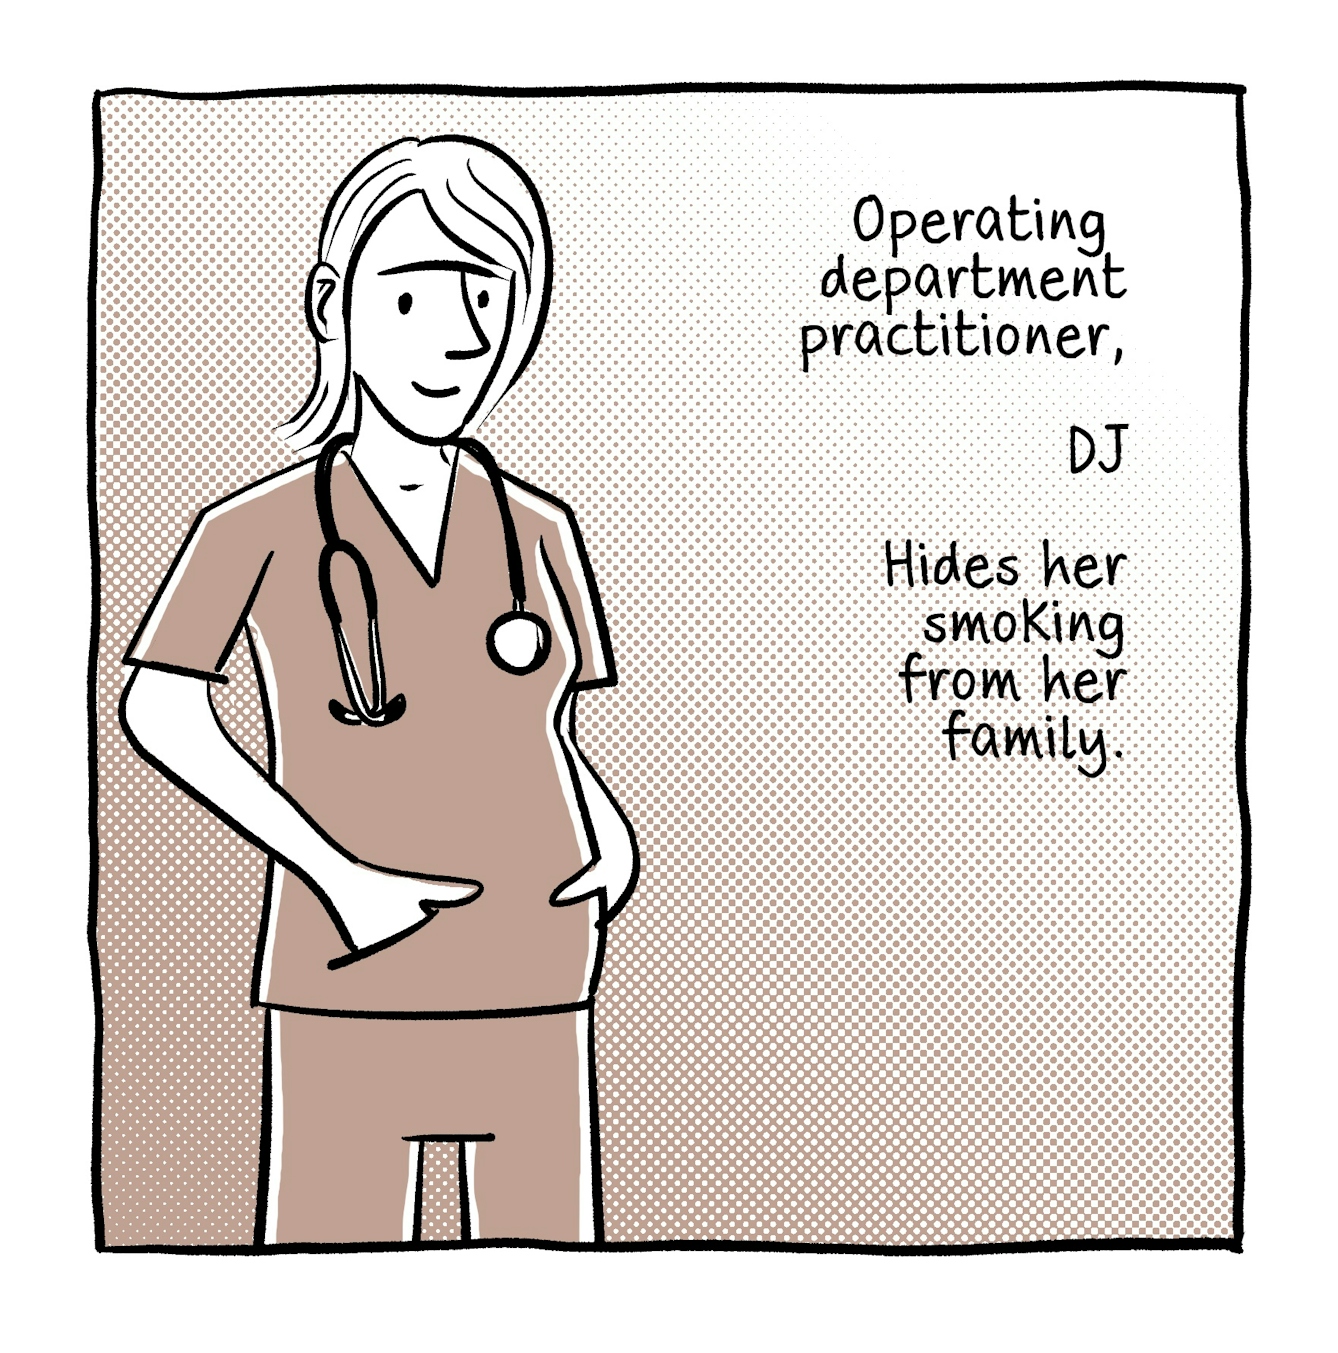 A four panel comic in black and white with a brown accent tone. 

The first panel shows a young female doctor standing with her hands in the pockets of her scrubs, stethoscope draped around her neck. She look calm and cool. The text next to her reads, "Operating department practitioner... DJ... Hides her smoking from her family."